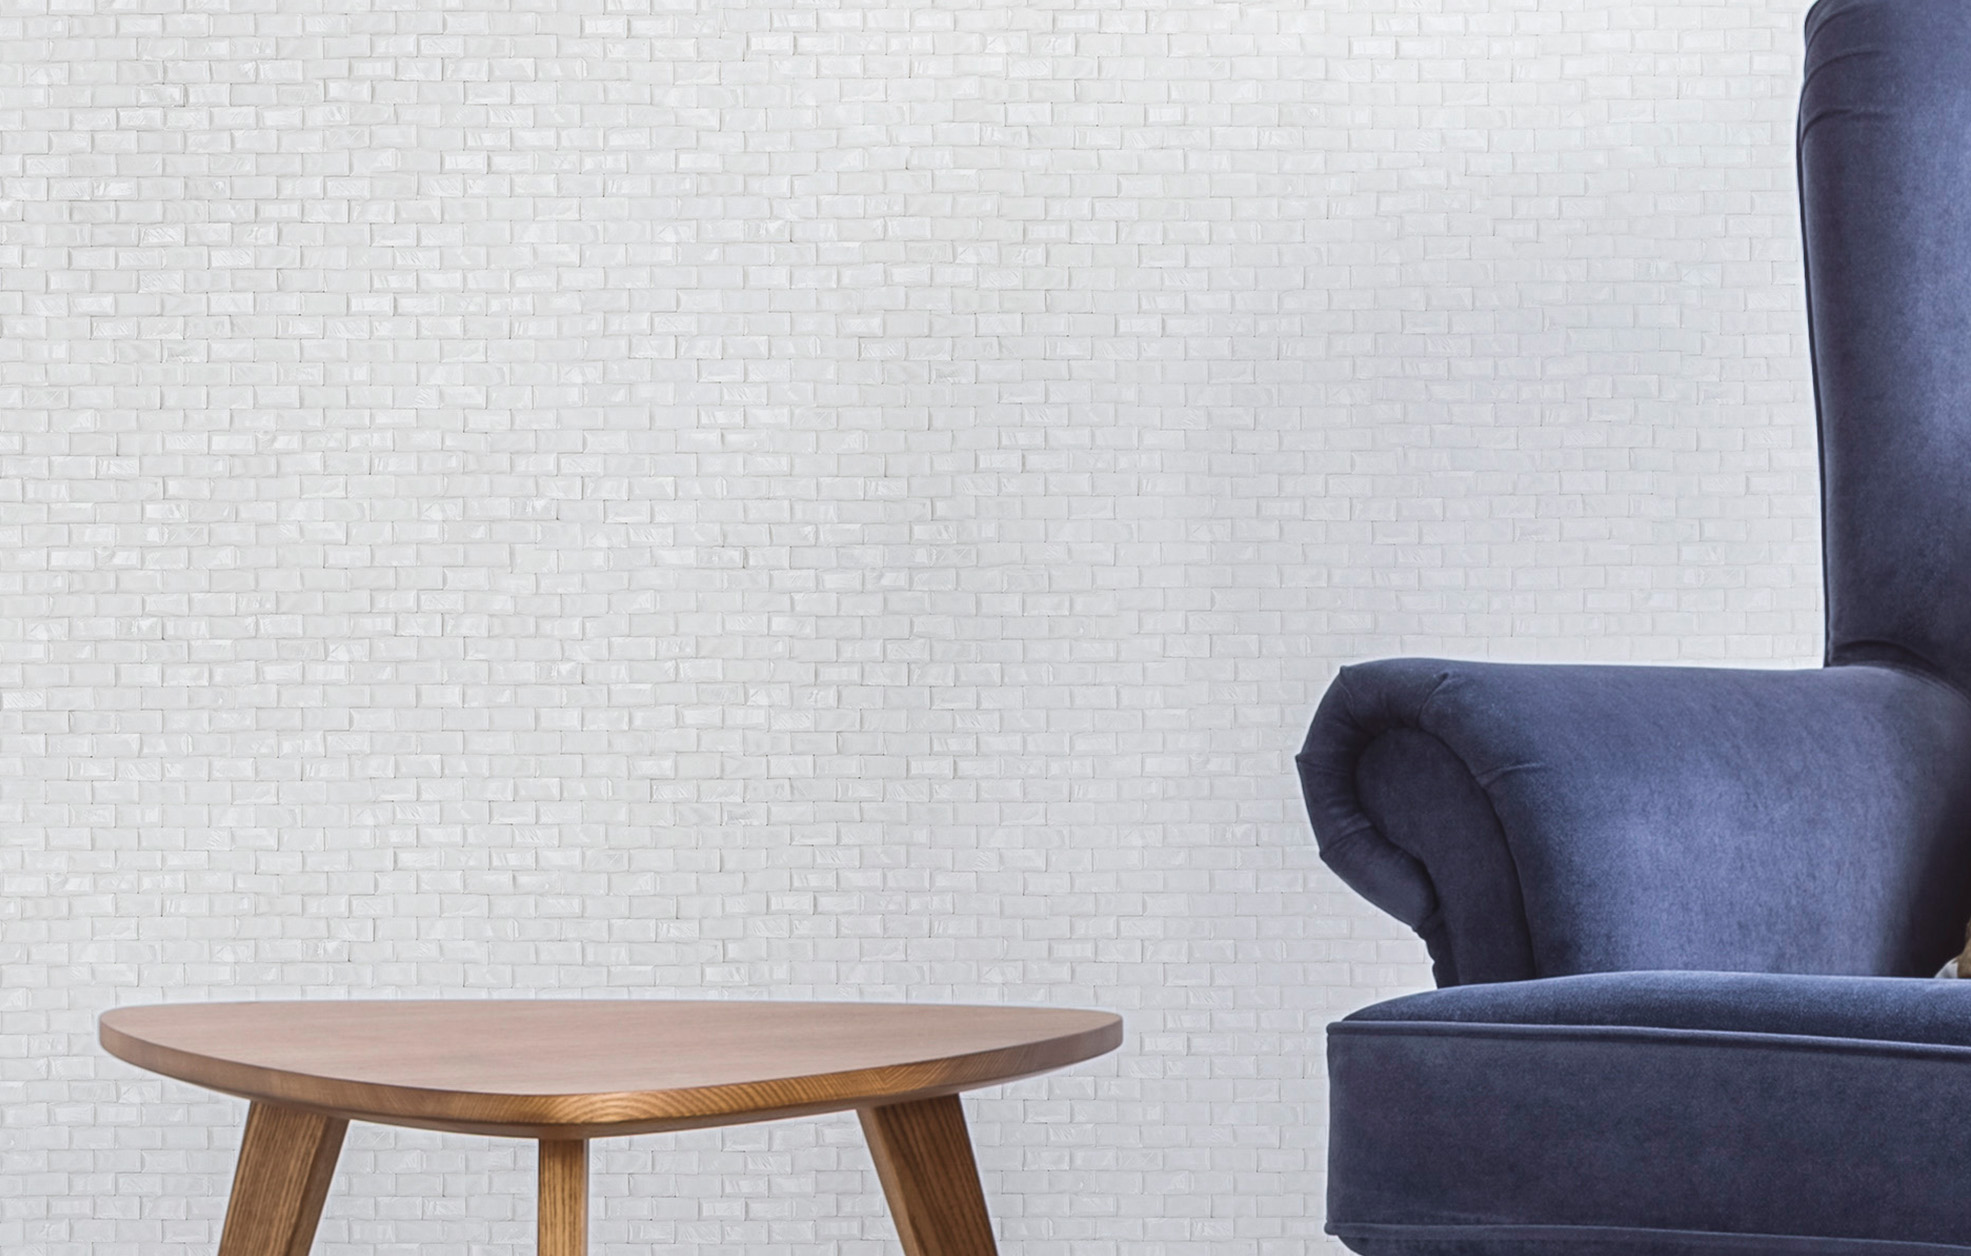 Siminetti Pavimento Brick from the Textures Collection